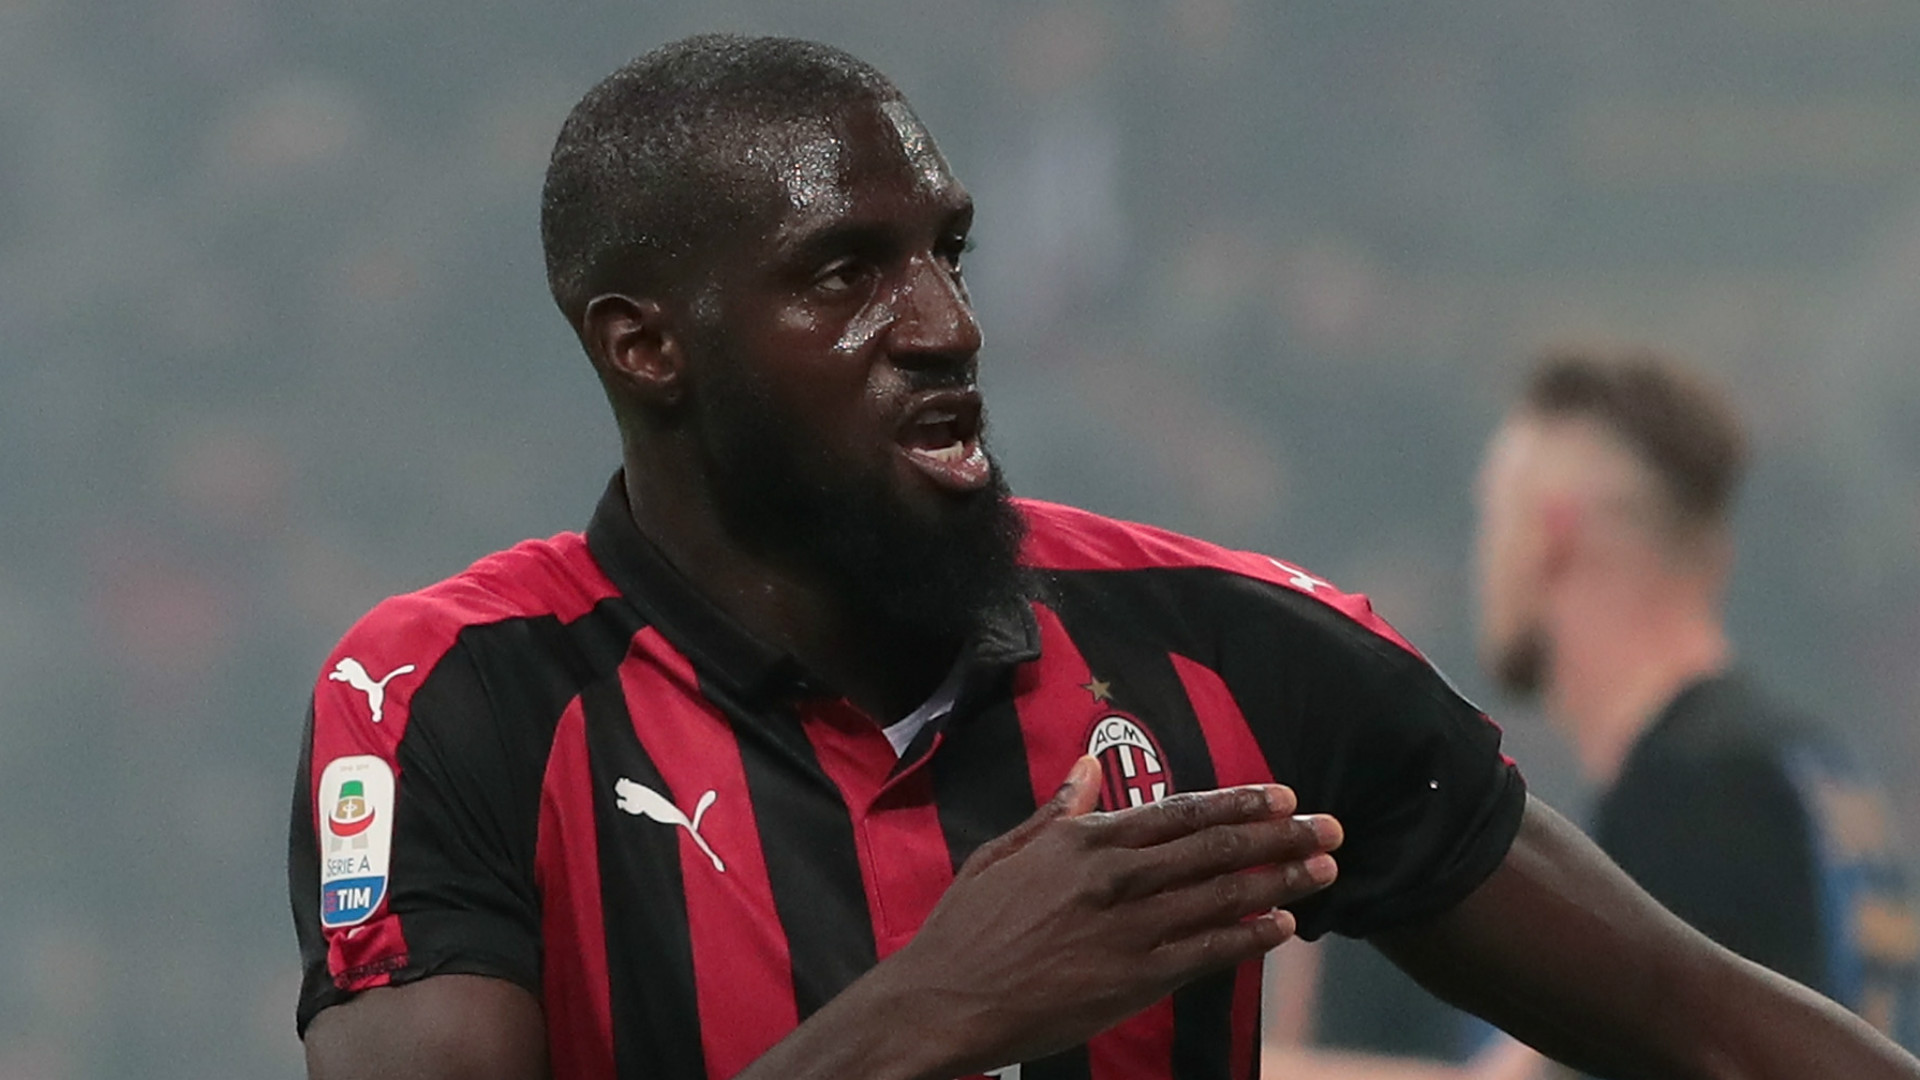 Bakayoko wants Chelsea stay despite interest from big clubs, says agent